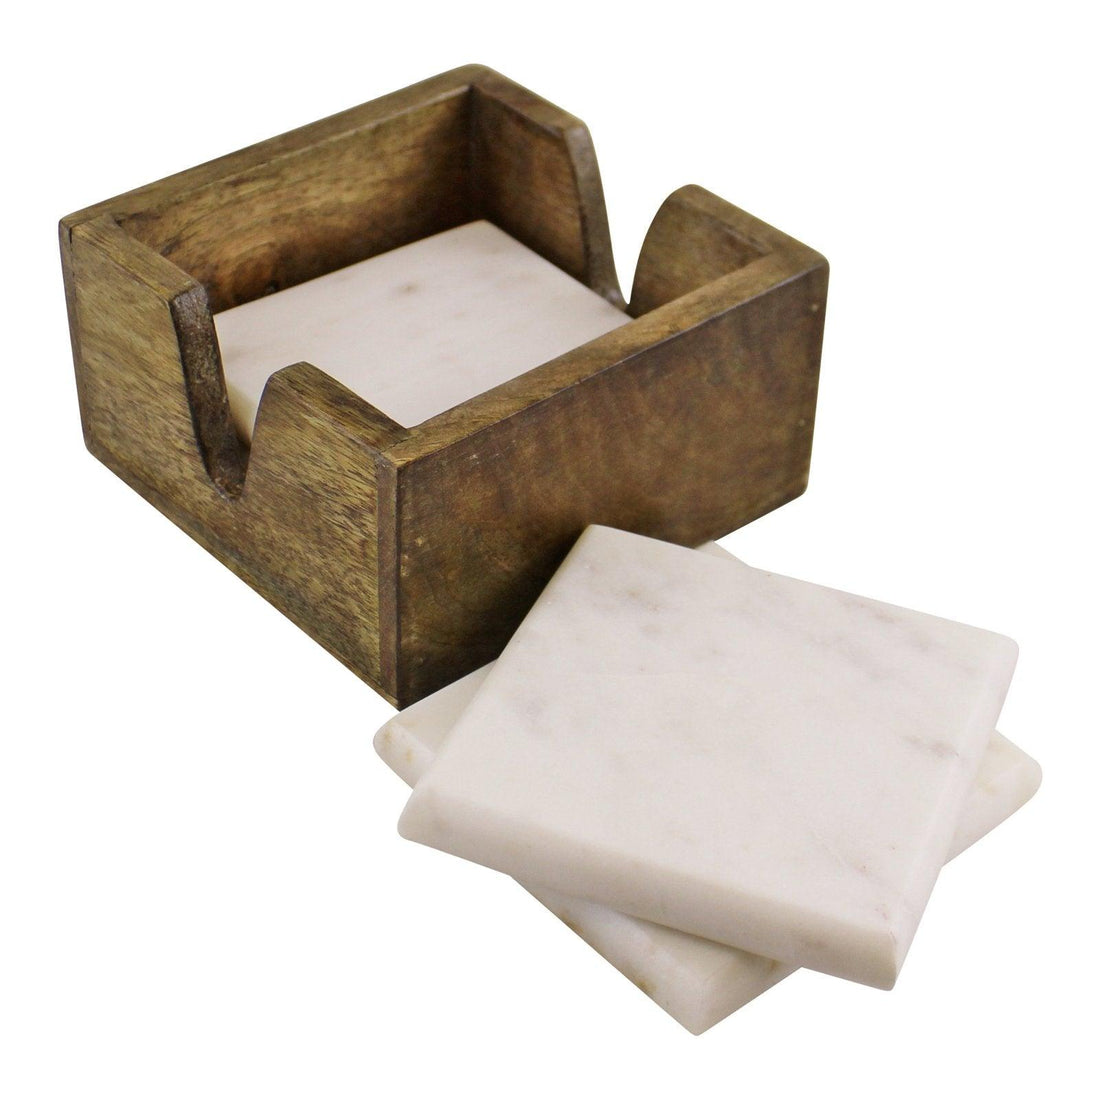 Set of 4 High Quality Marble Coasters In A Mango Wood Holder - £31.99 - Coasters & Placemats 